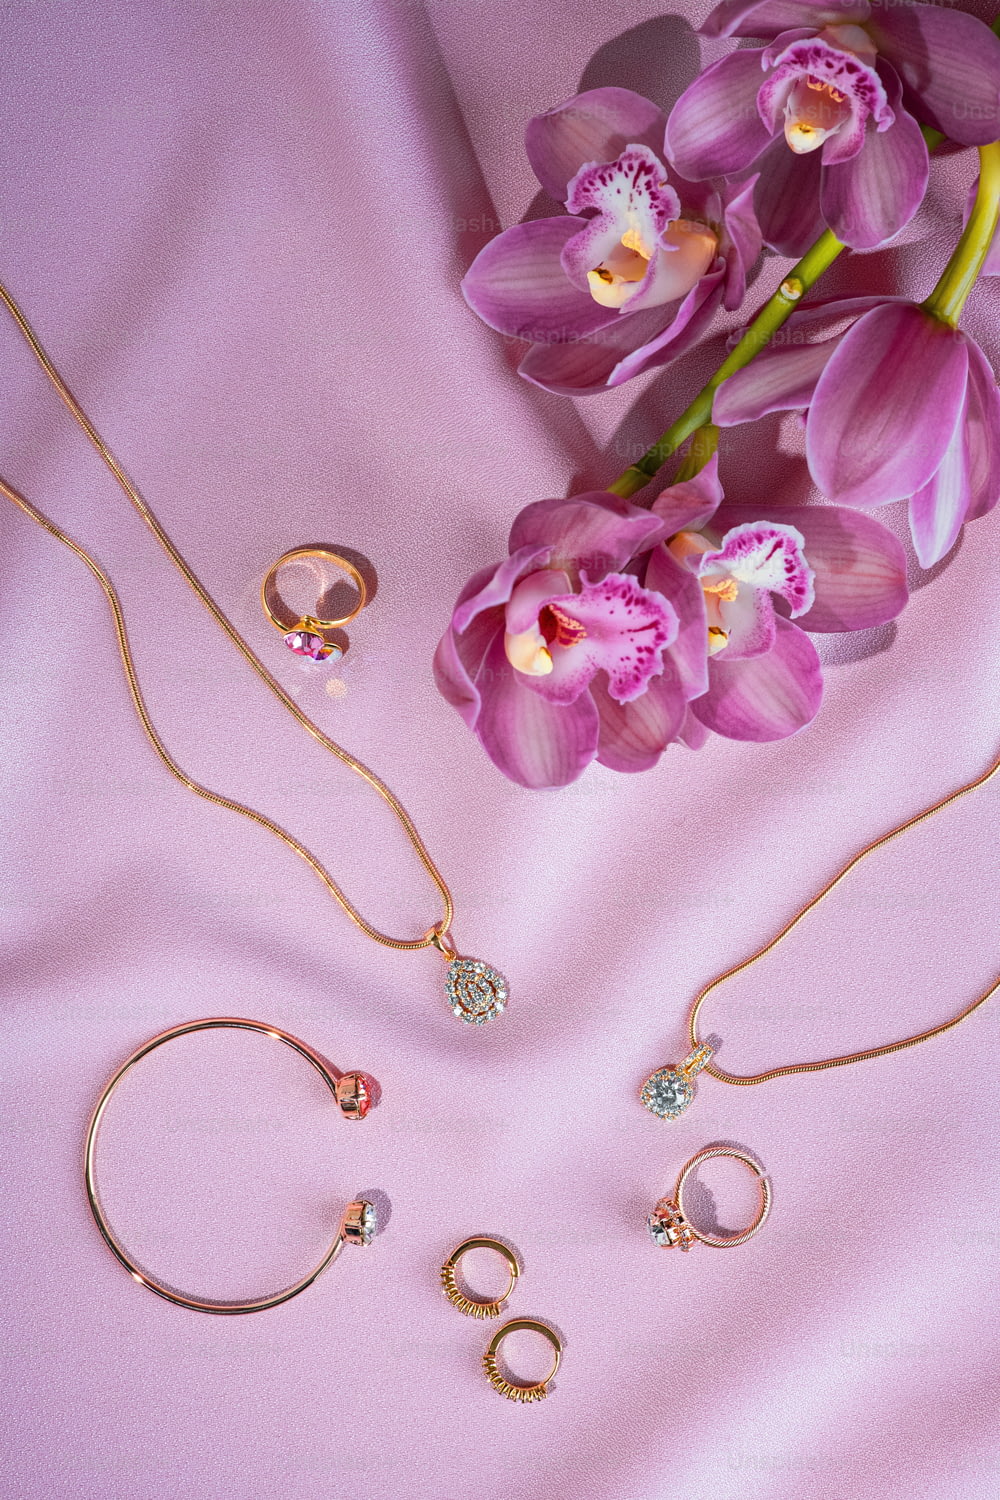 a bunch of jewelry laying on a pink surface